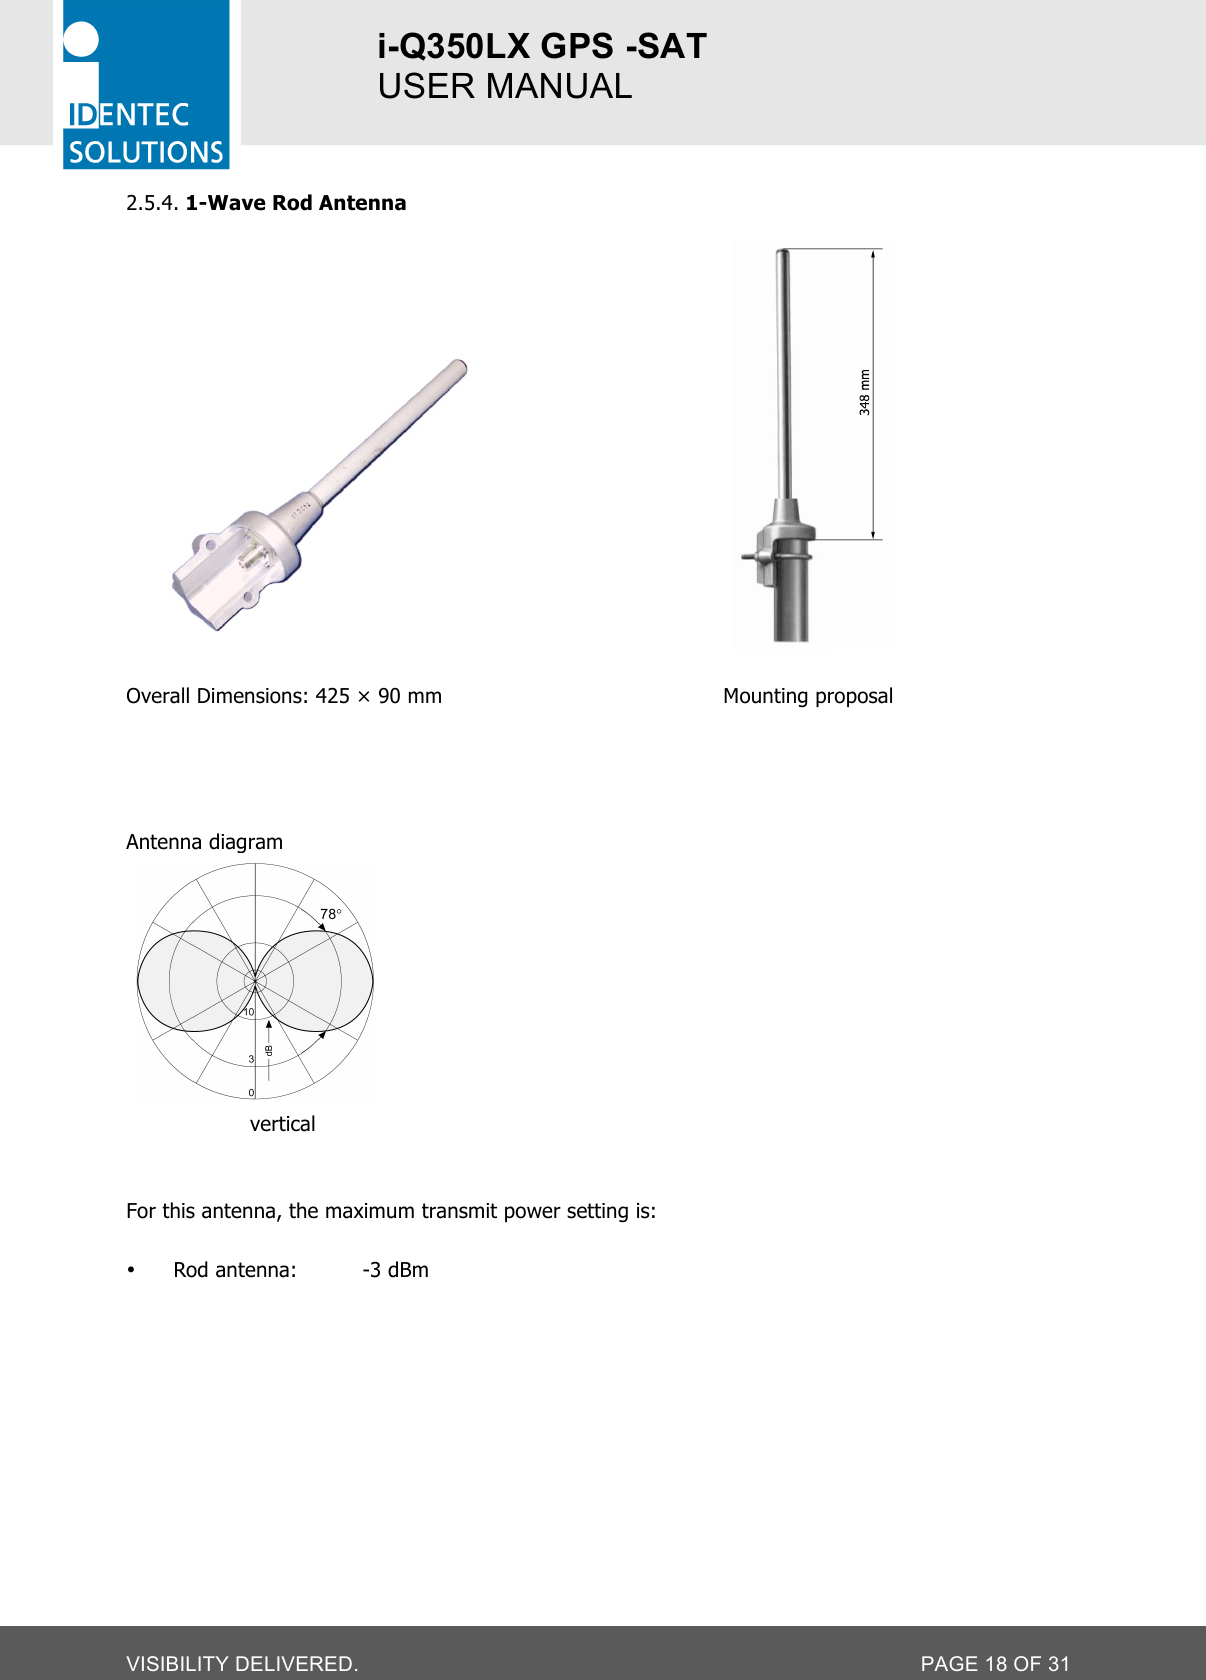 i-Q350LX GPS -SAT  USER MANUAL  VISIBILITY DELIVERED.  PAGE 18 OF 31 2.5.4. 1-Wave Rod Antenna                  Overall Dimensions: 425 × 90 mm           Mounting proposal     Antenna diagram                     vertical   For this antenna, the maximum transmit power setting is:  • Rod antenna:    -3 dBm  